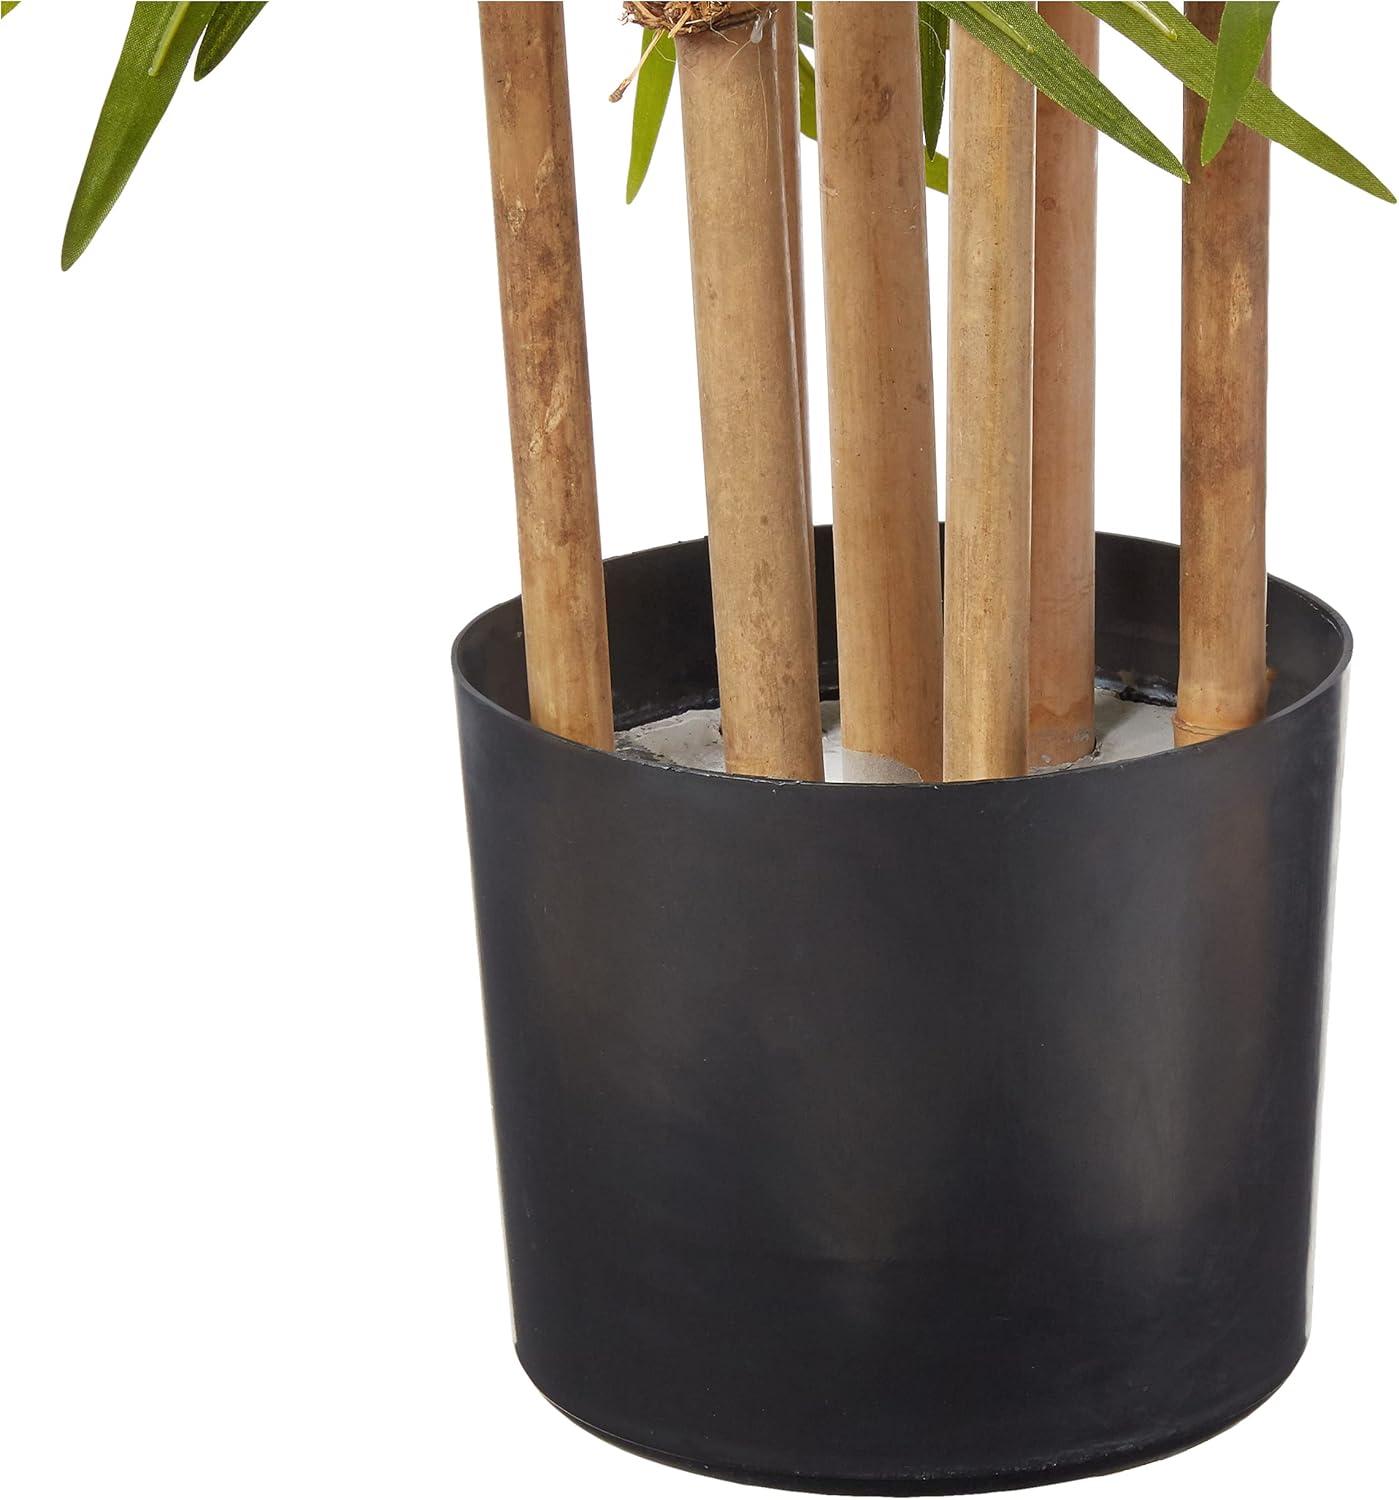 Elegant 64" Silk Bamboo Potted Floor Plant for Outdoor Ambiance